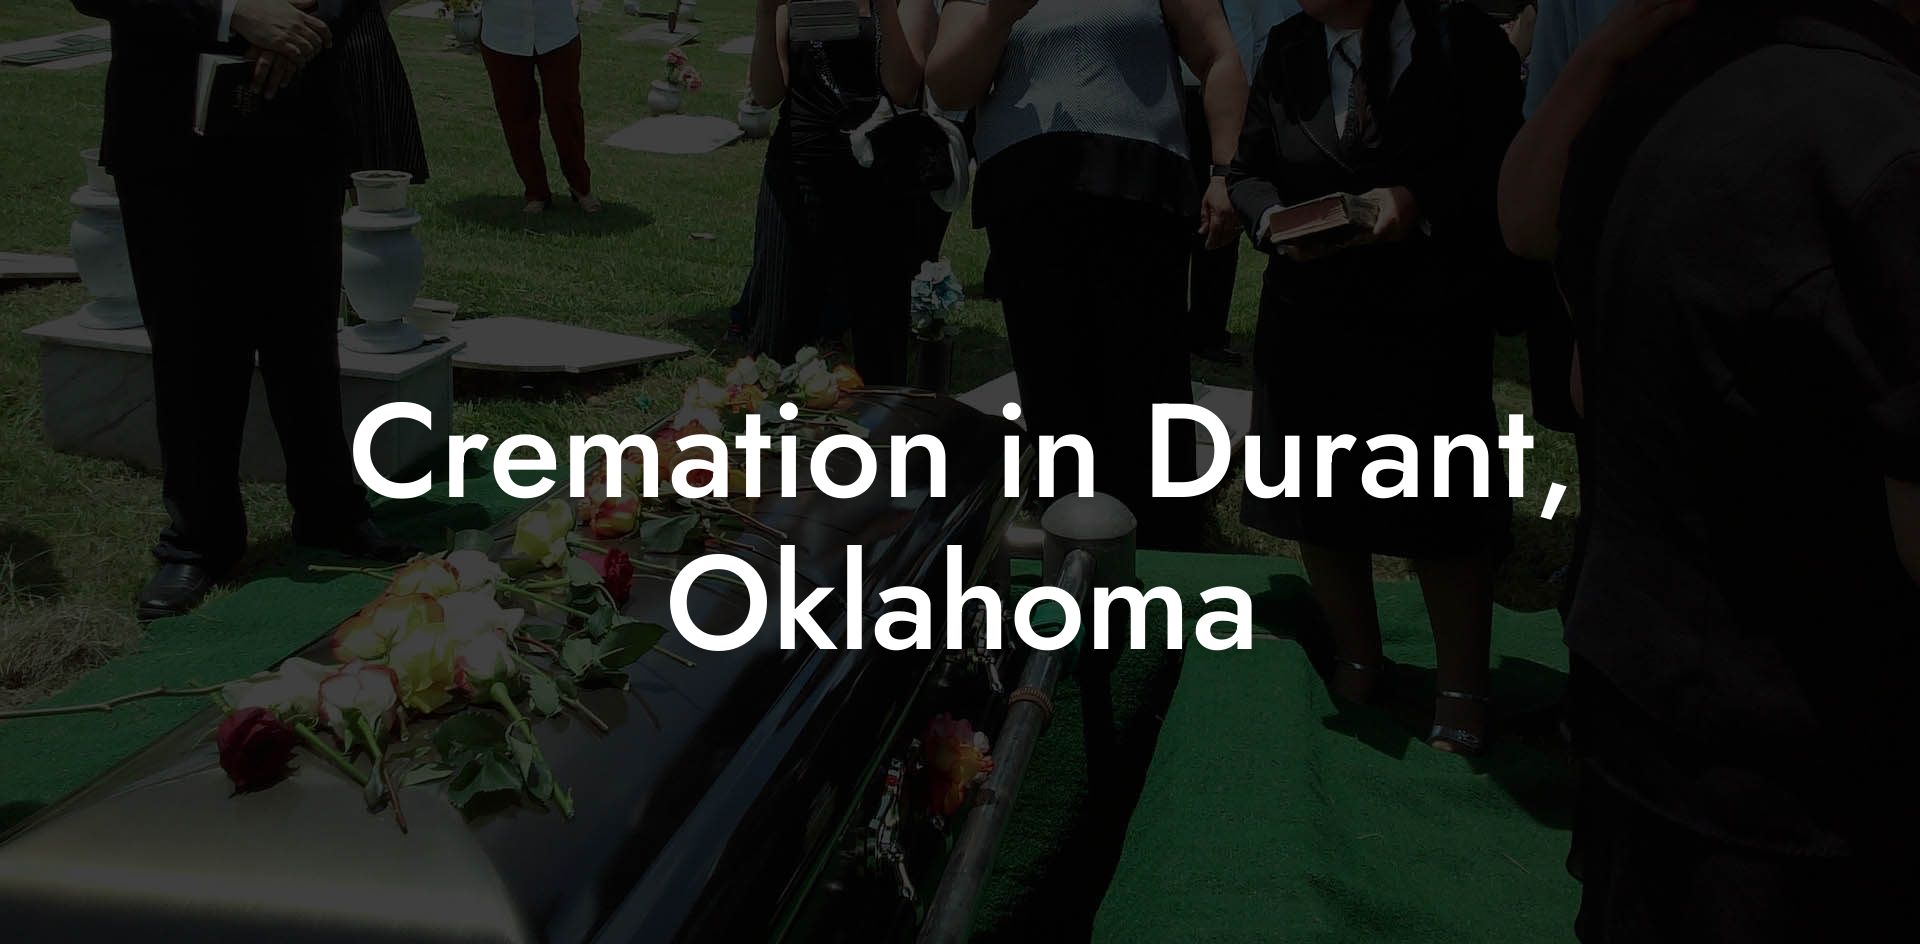 Cremation in Durant, Oklahoma